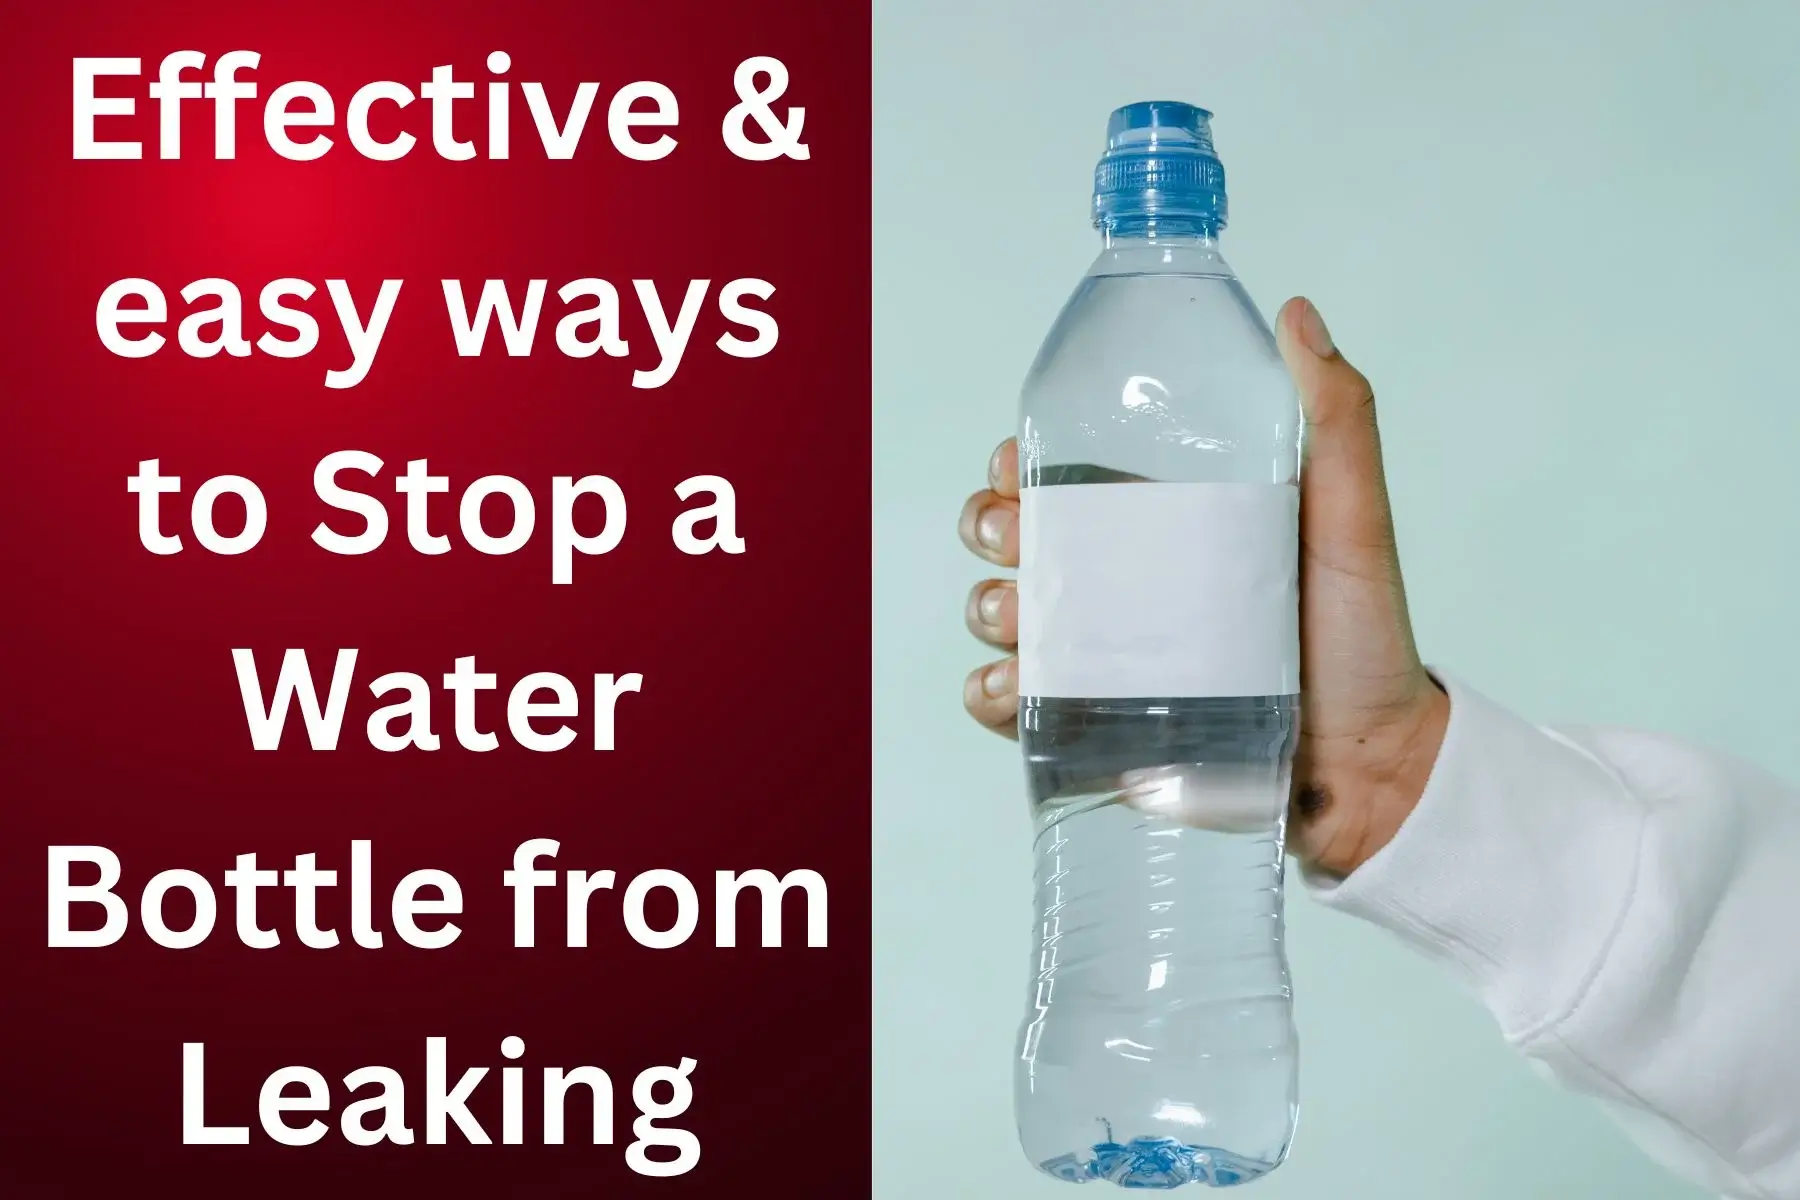 How to Stop a Water Bottle from Leaking